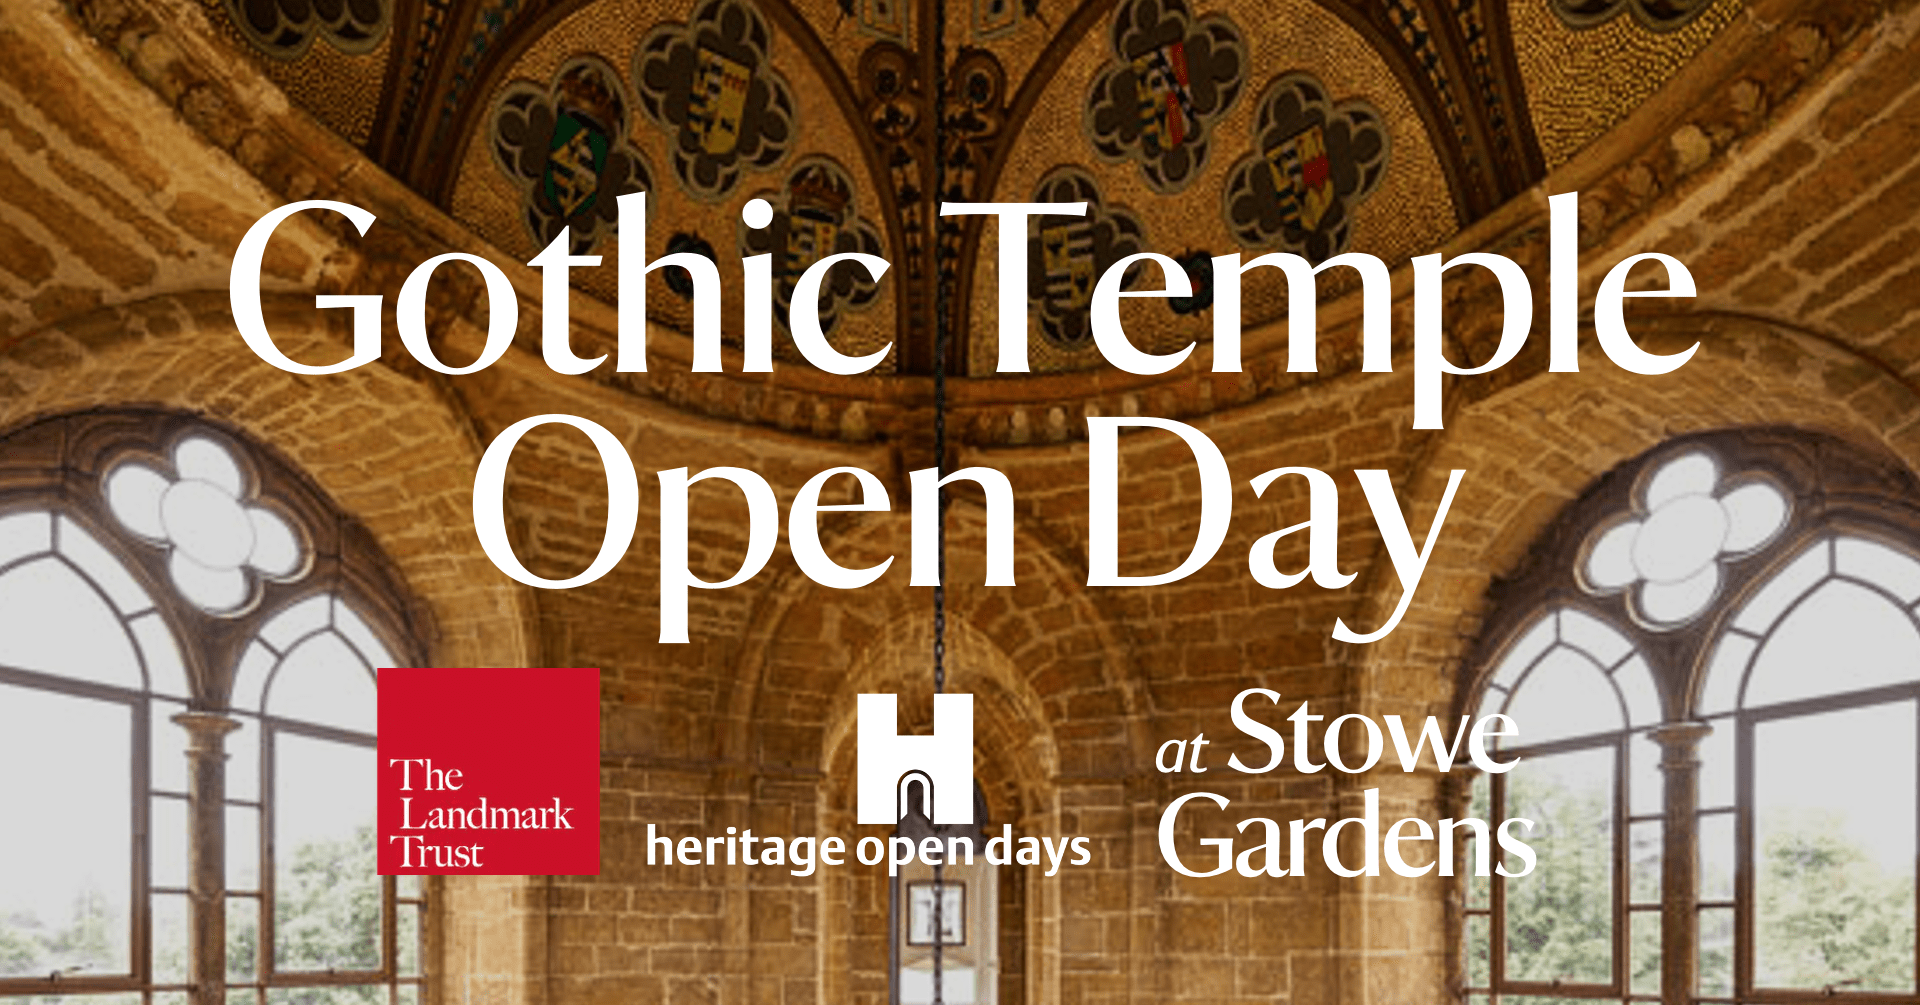 Gothic Temple Open Day at Stowe Gardens Top Image